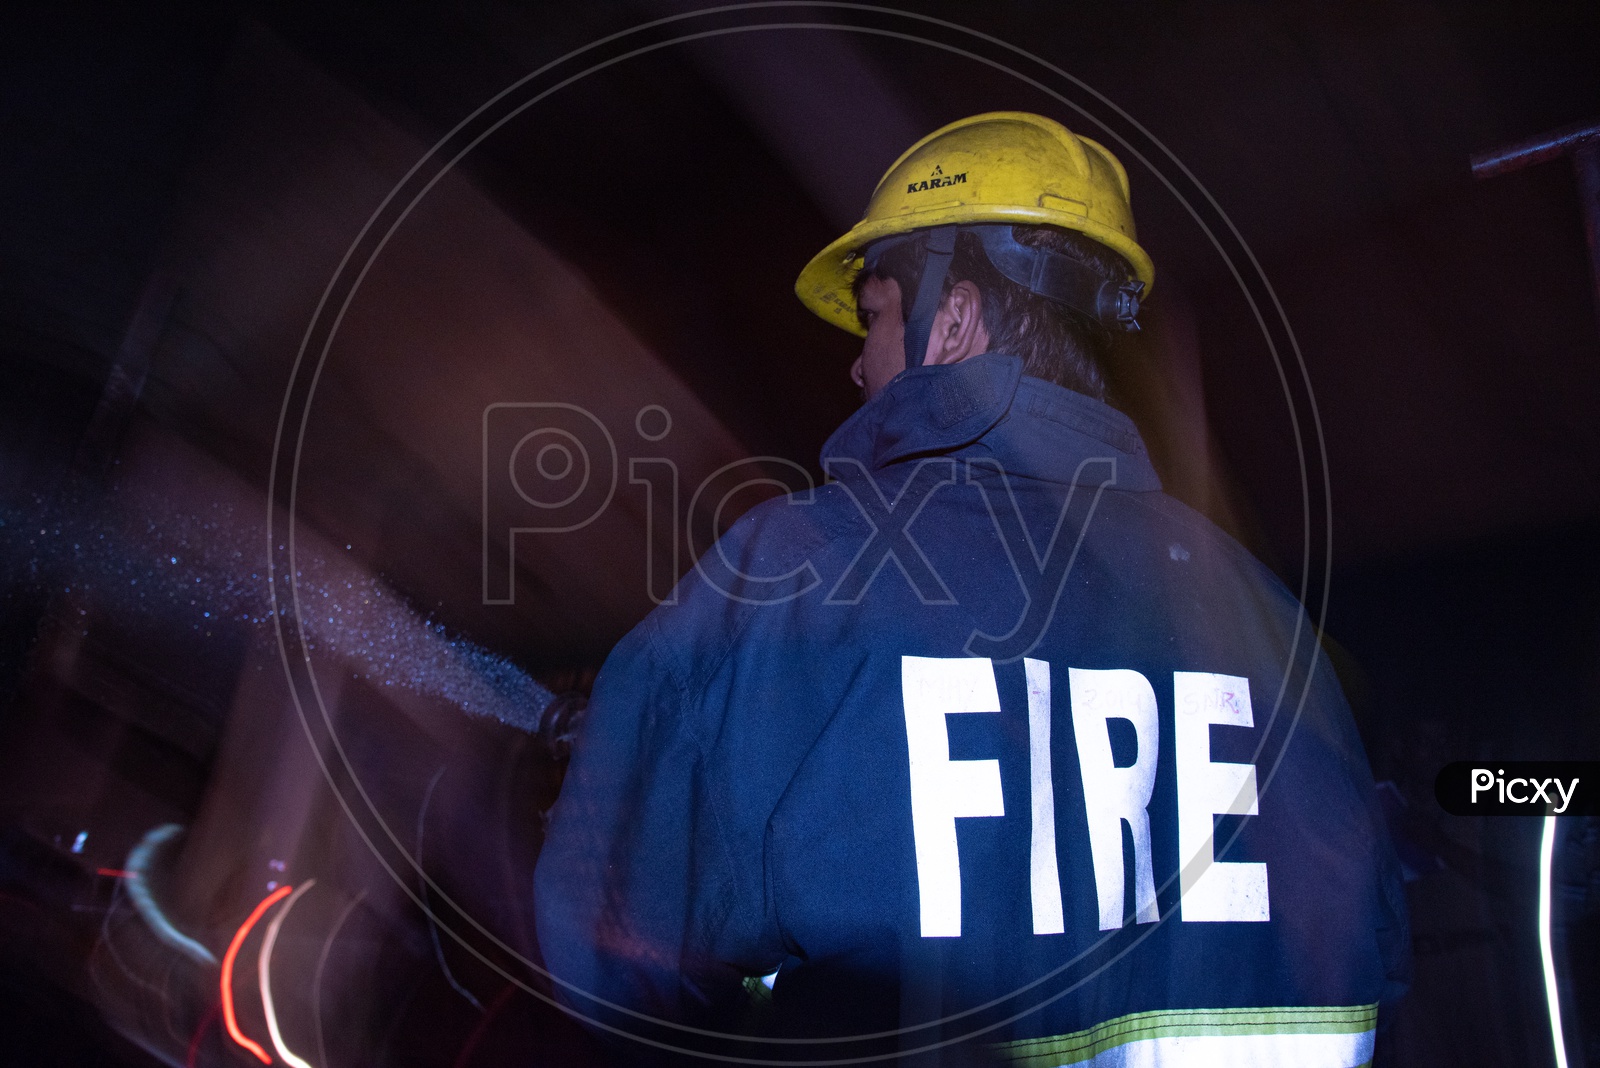 Fire Man  Fighting to Control  a Fire Mishap